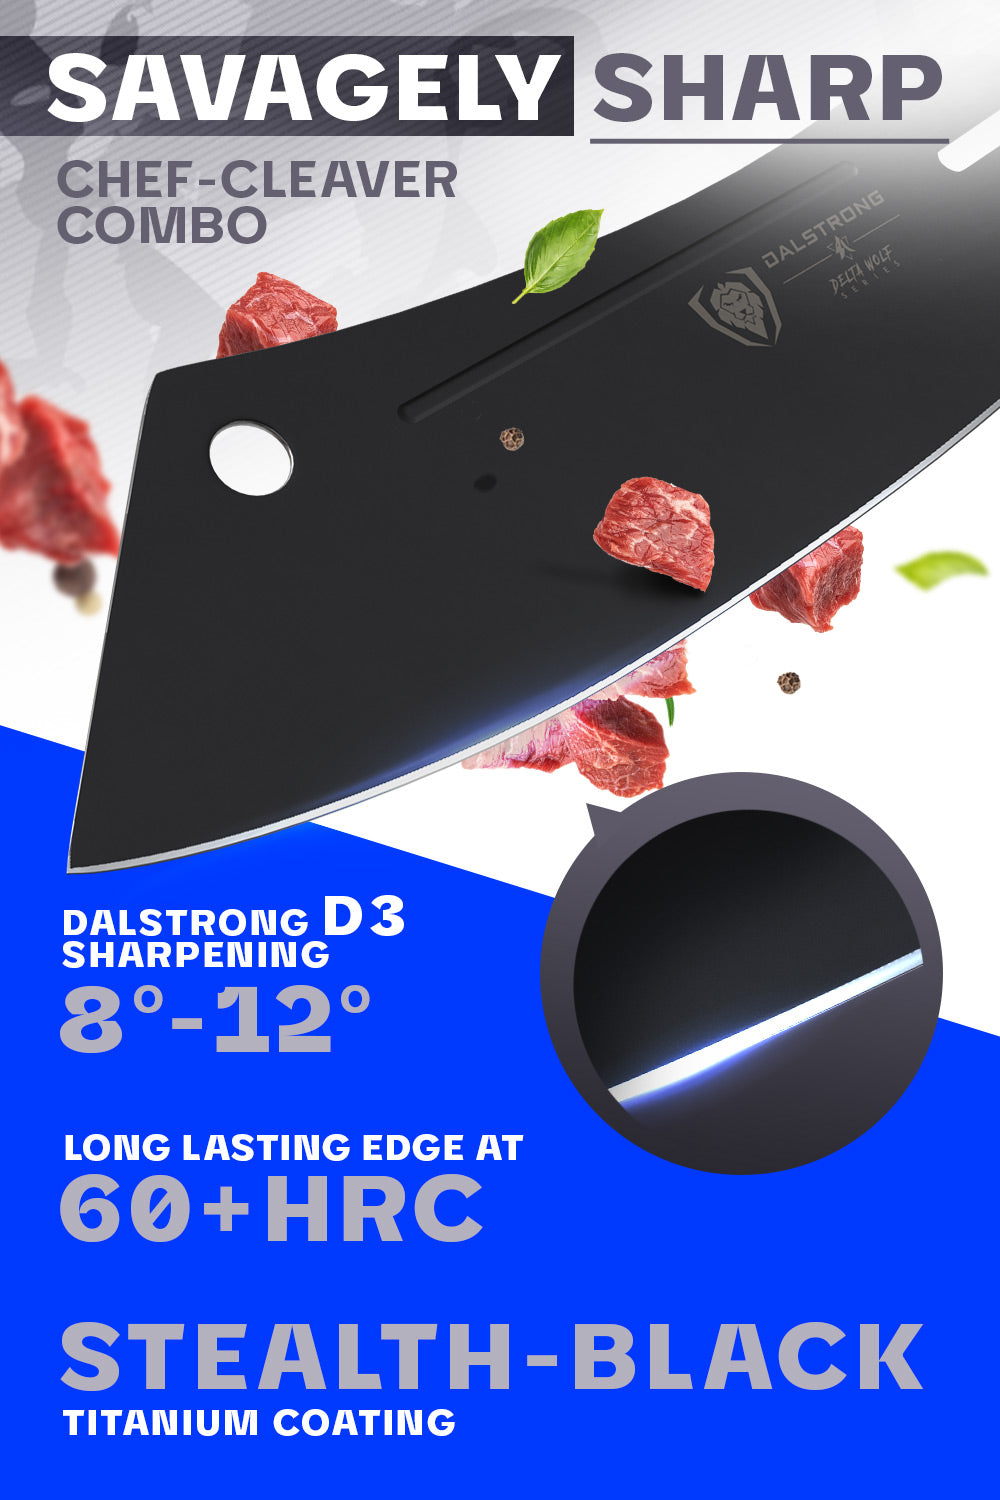 Dalstrong delta wolf series 8 inch crixus cleaver knife featuring it's razor sharp blade.